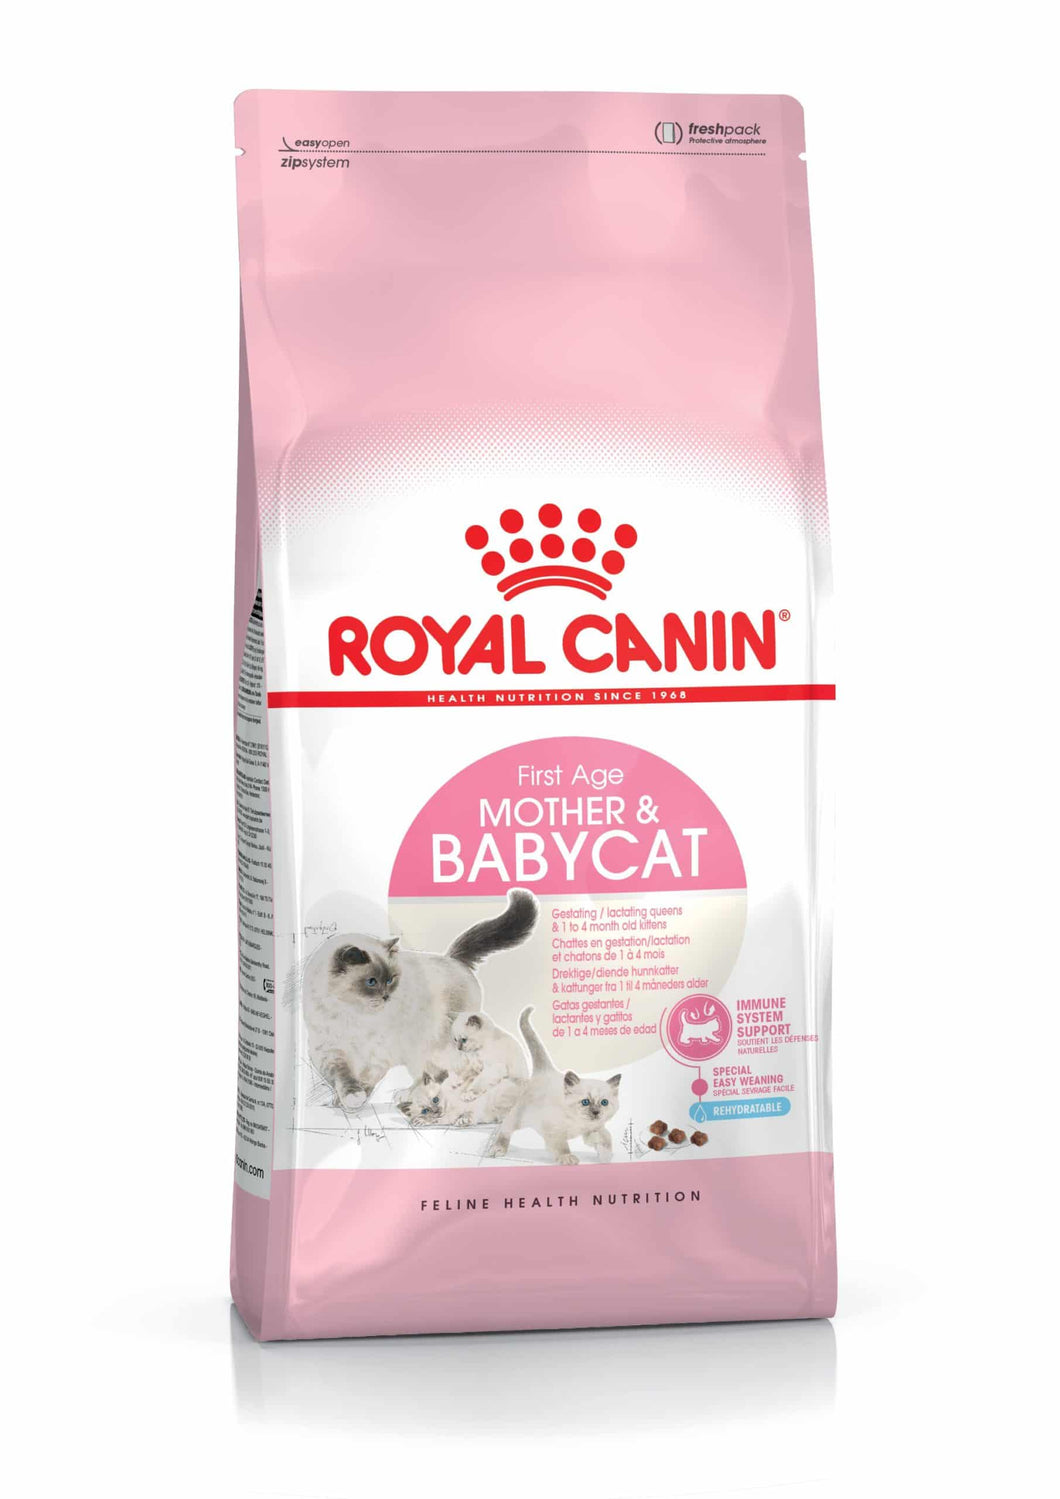 ROYAL CANIN MOTHER AND BABYCAT 2KG